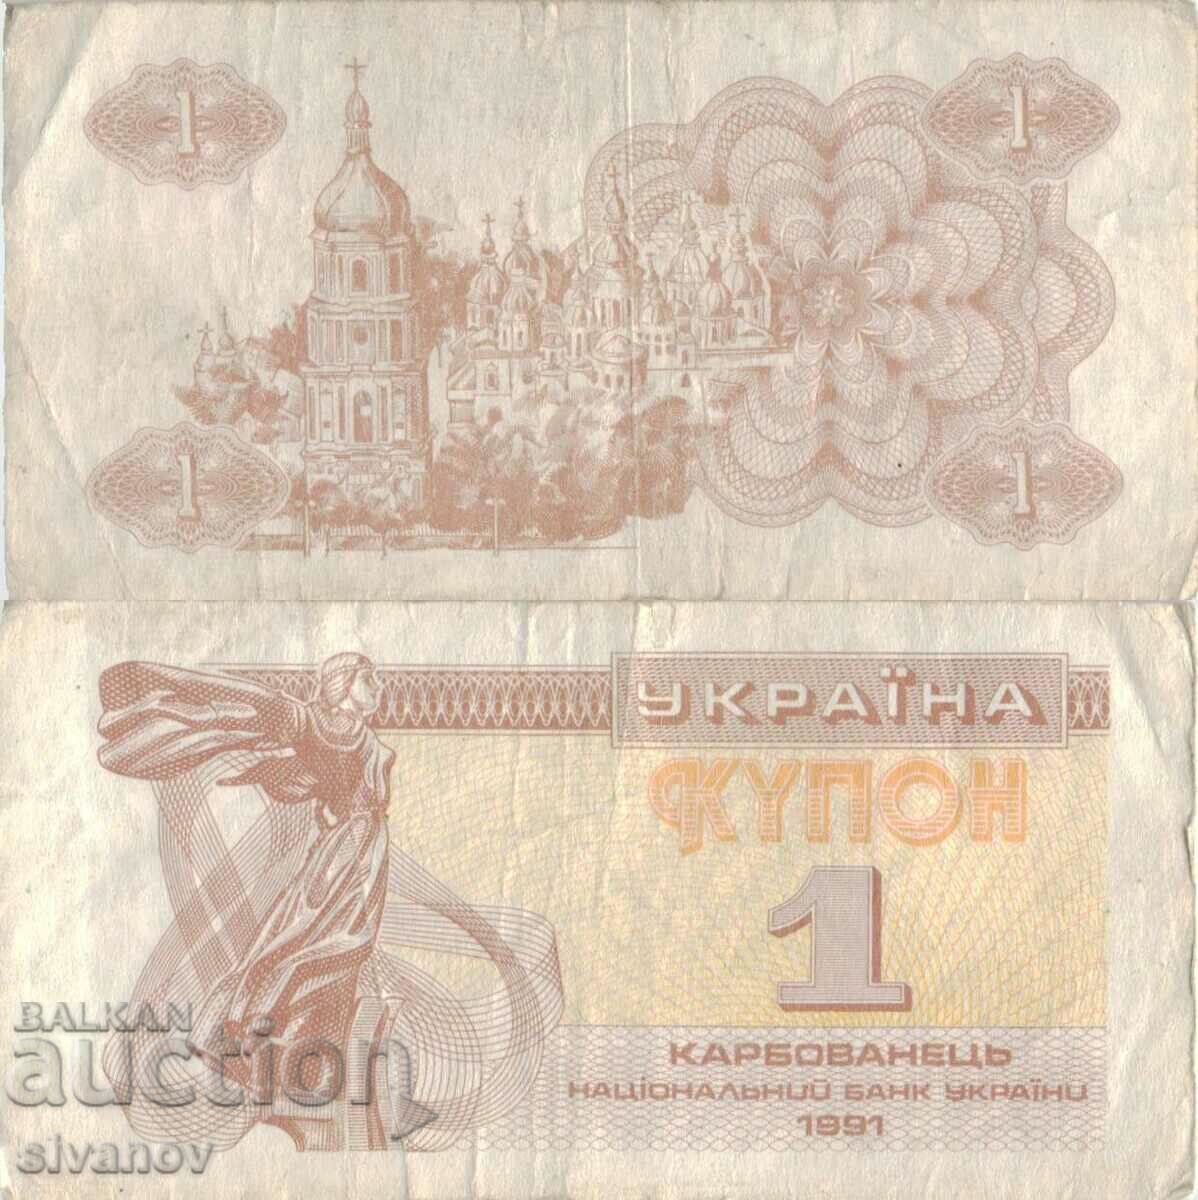 Ukraine 1 coupon karbovanets 1991 #4837